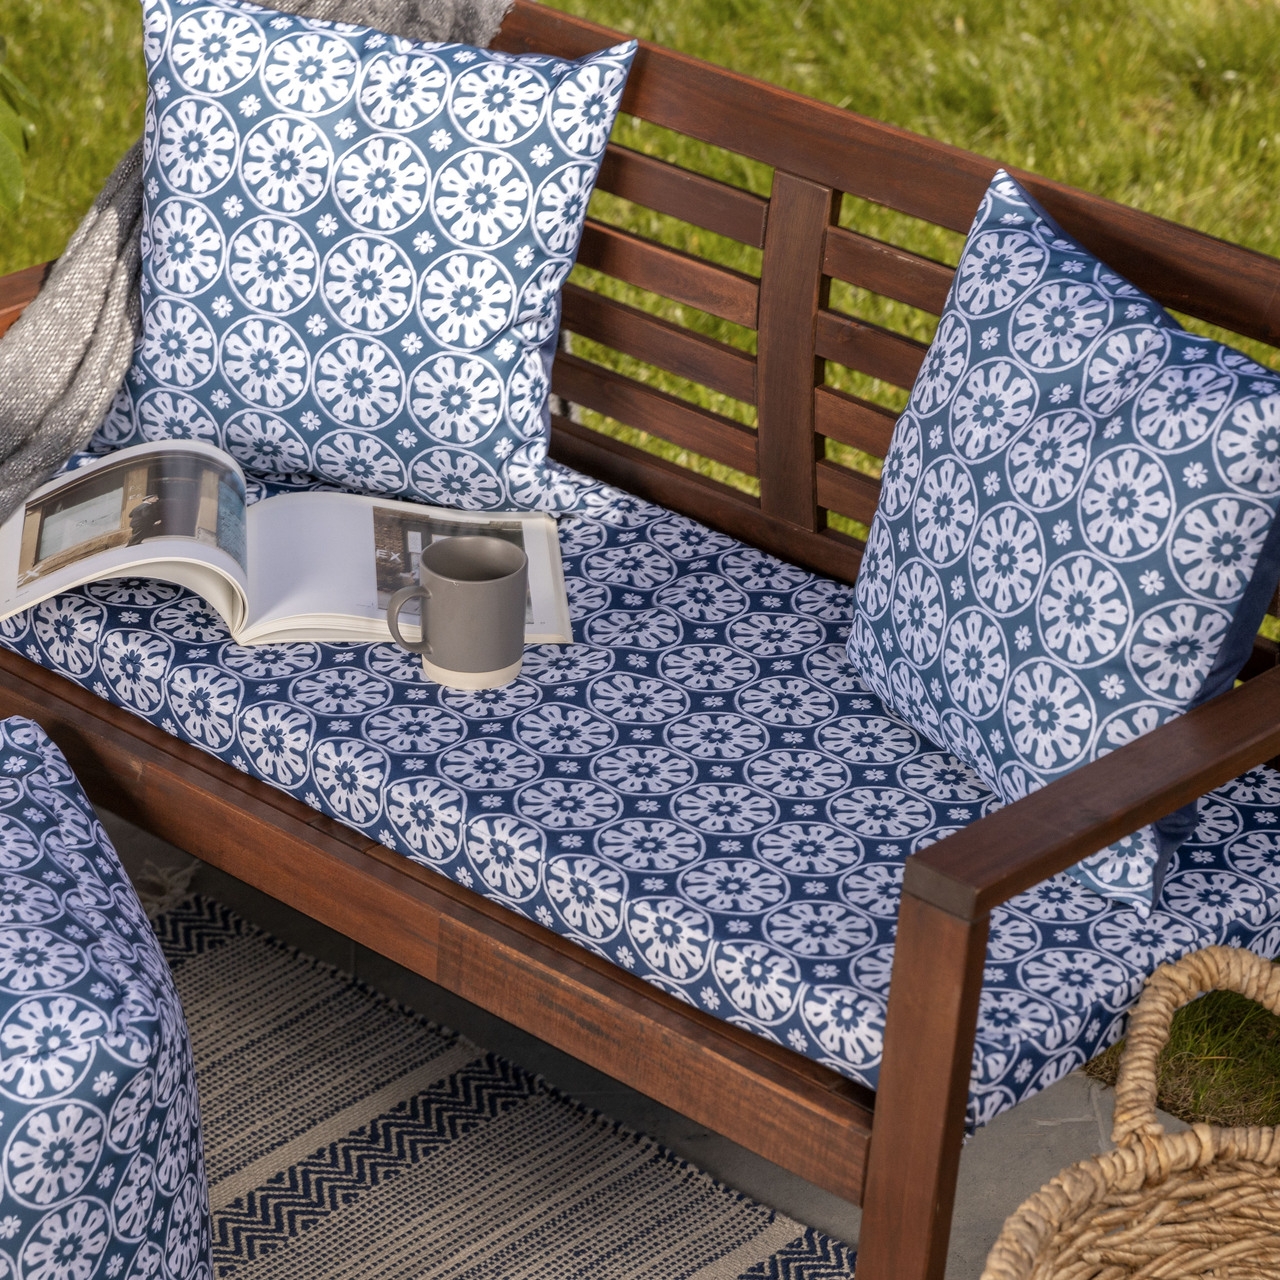 Celina Digby Luxury Water Resistant Garden Outdoor Bench Seat Pad – Casablanca Navy (Available in 2-Seater or 3-Seater Size) (114cm x 47cm 6cm)